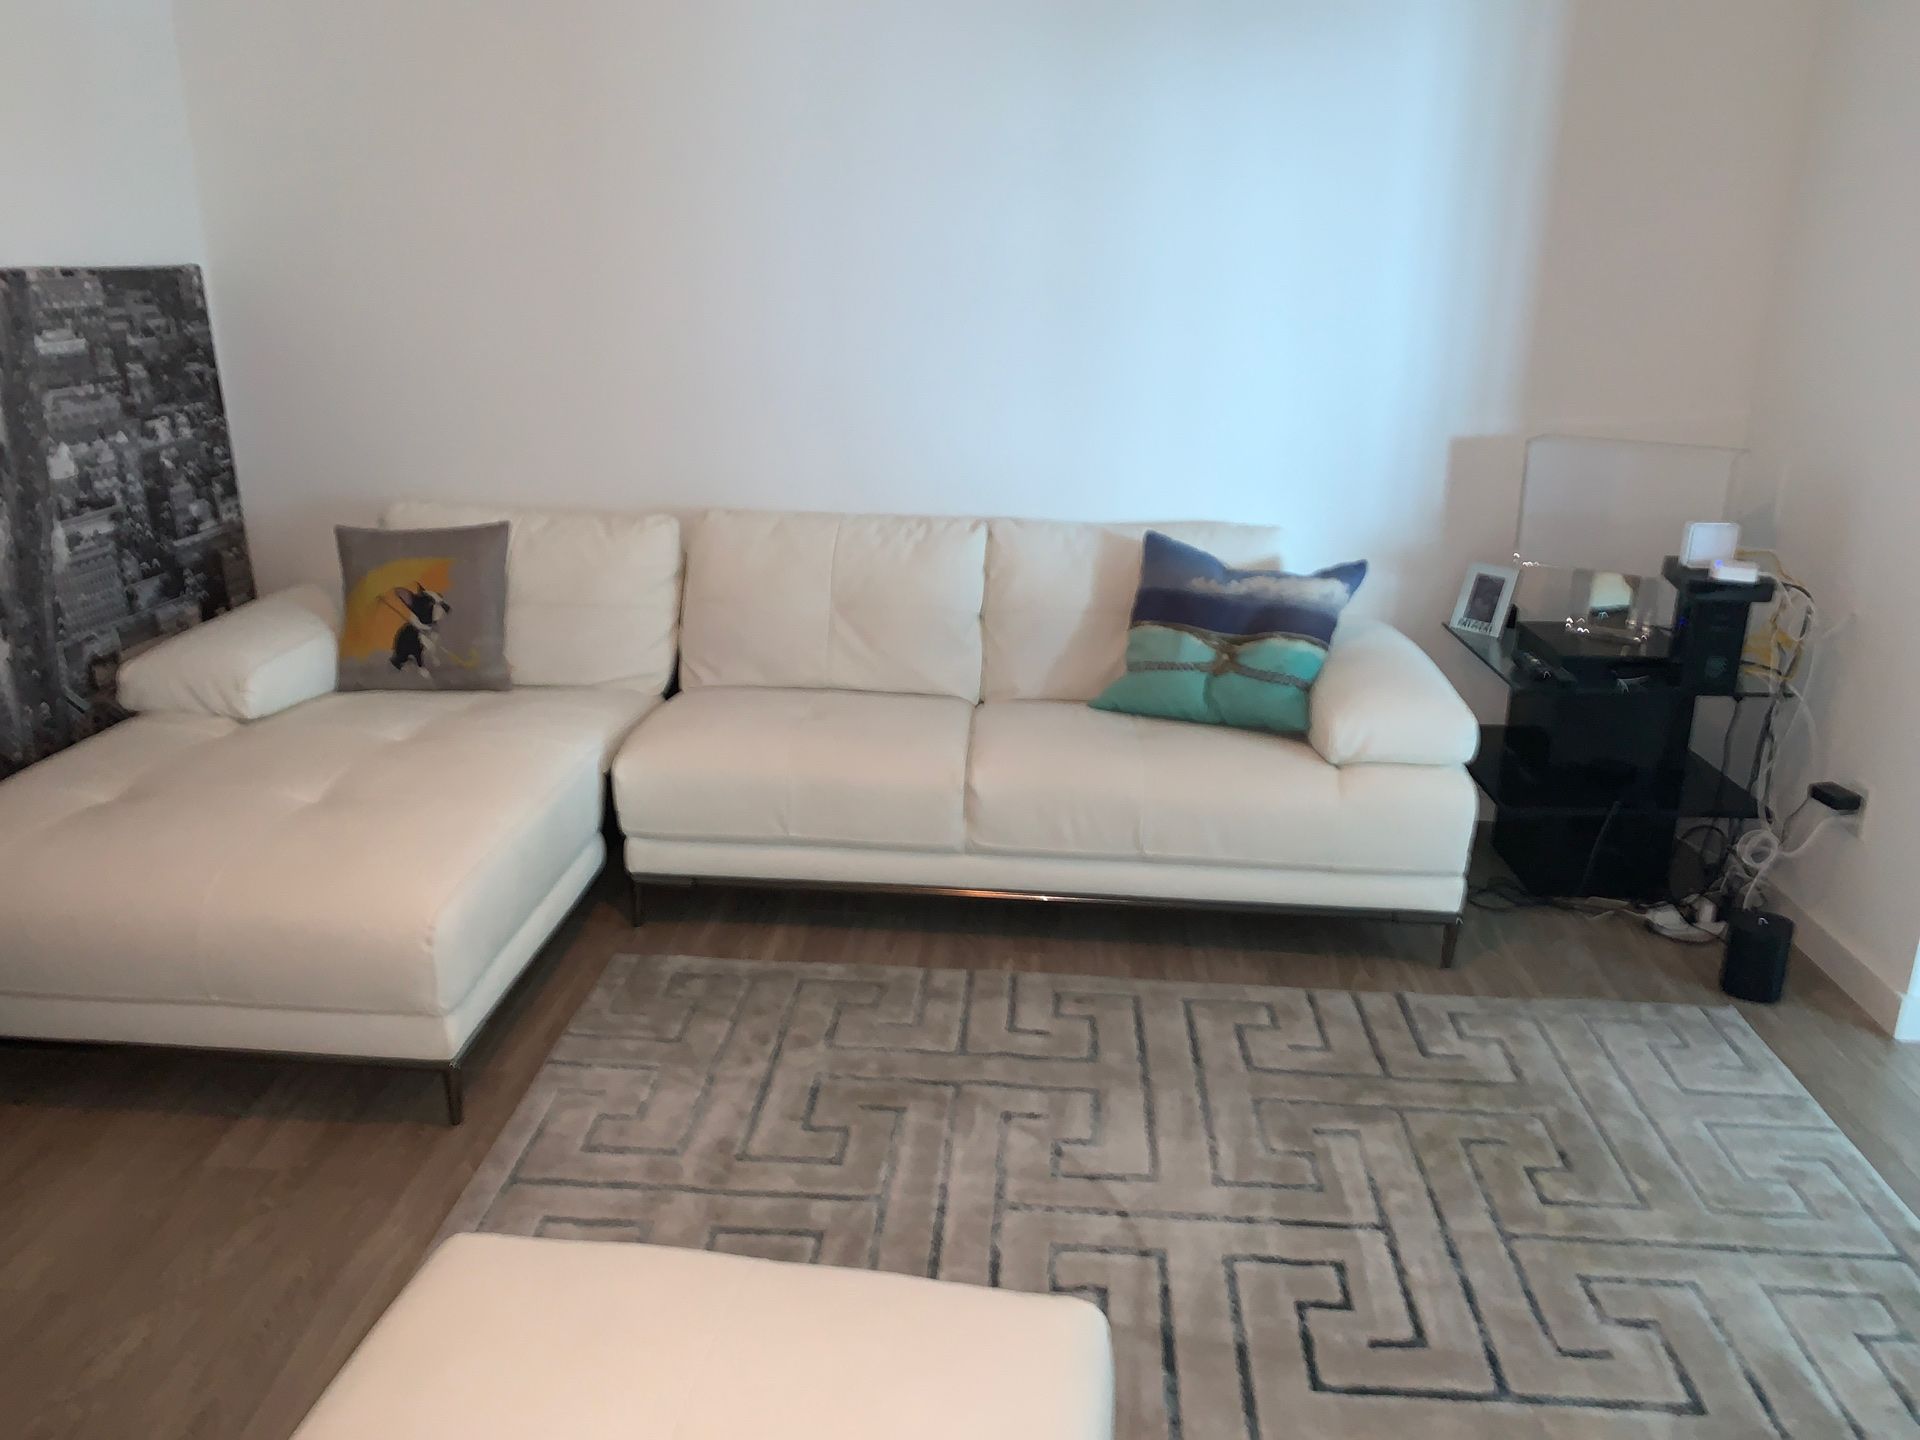 White Leather Couch - AMAZING CONDITION